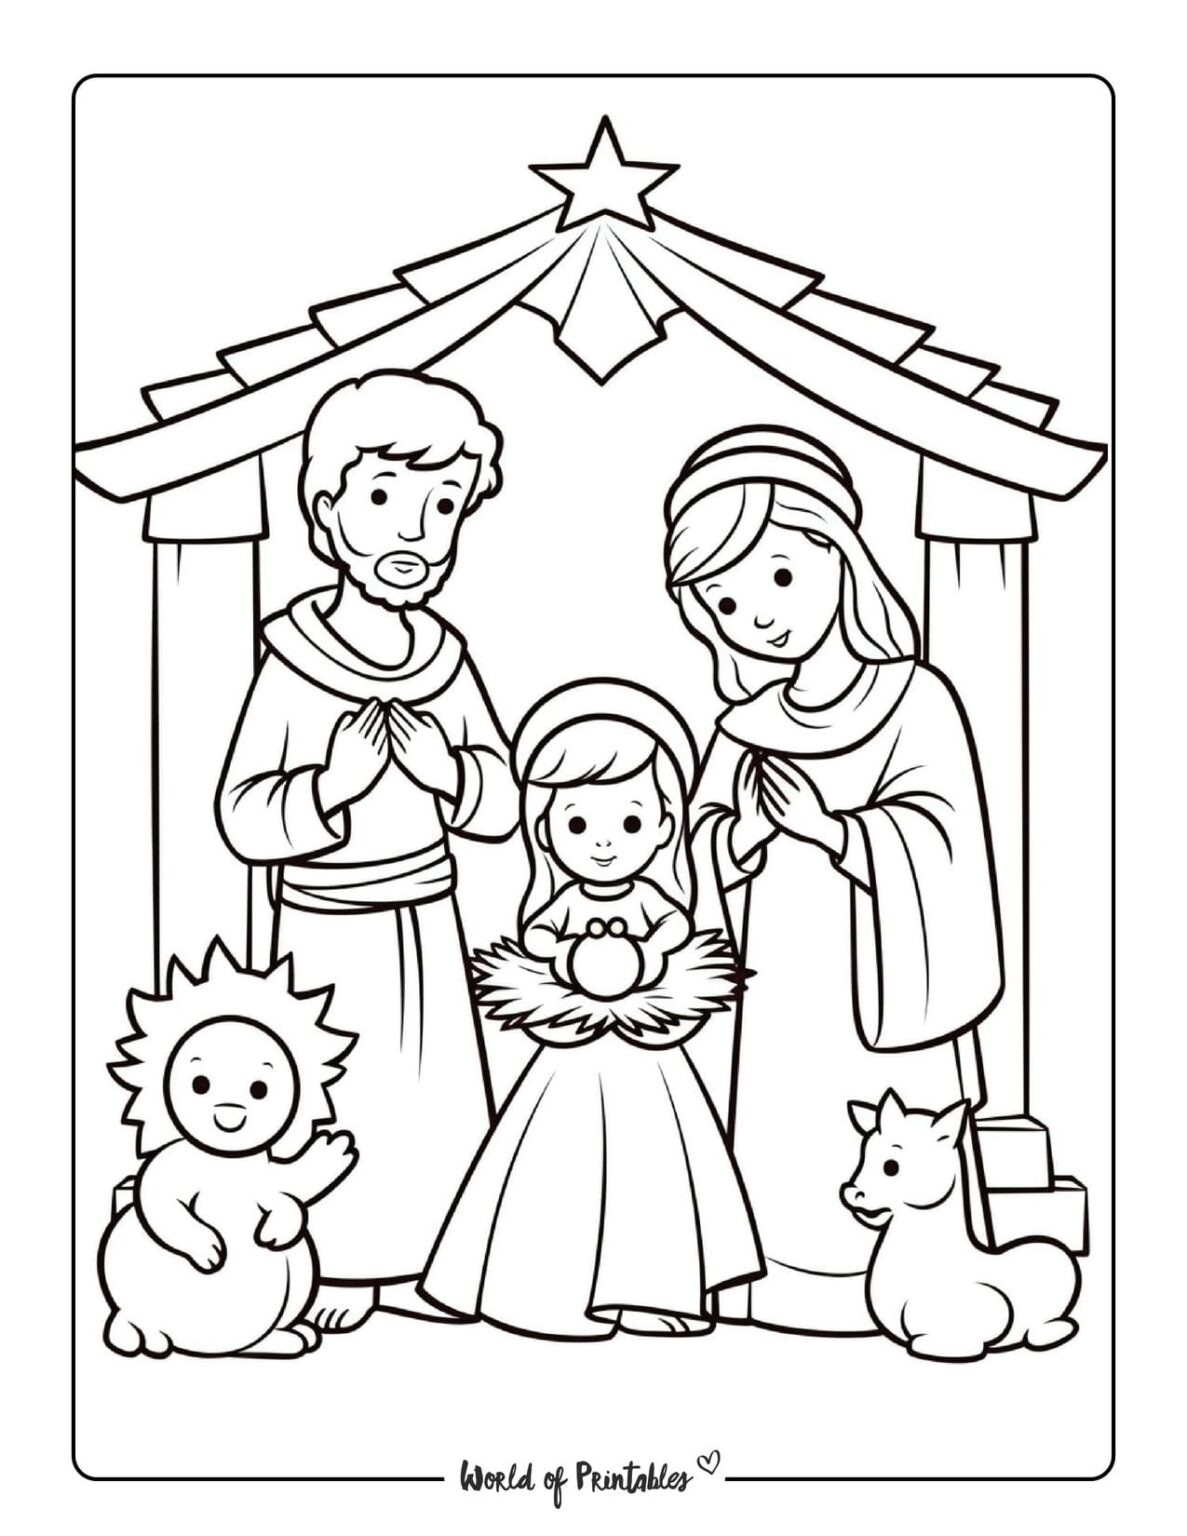 Nativity Coloring Pages - World of Printables